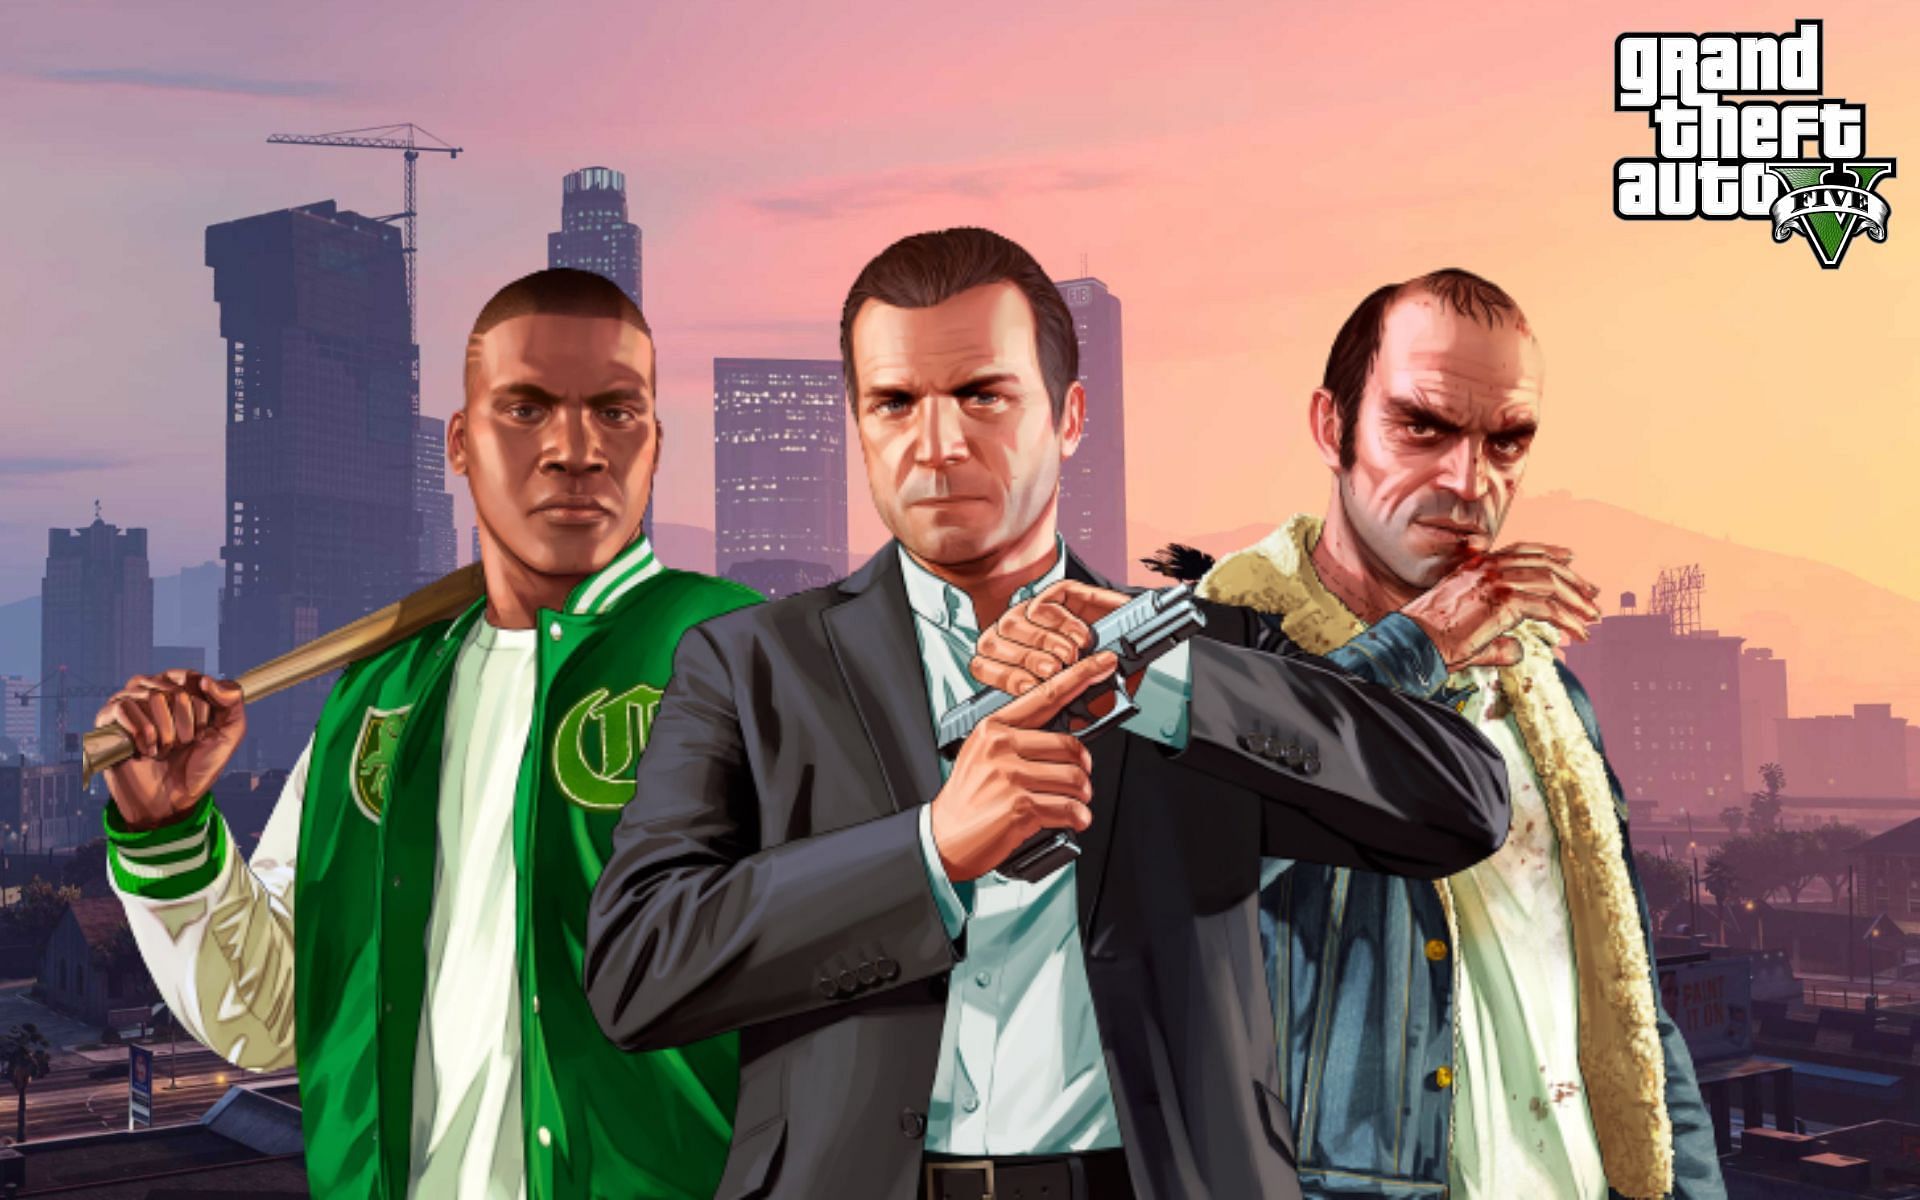 GTA 5 on PS5 and Xbox Series X is actually worth buying again